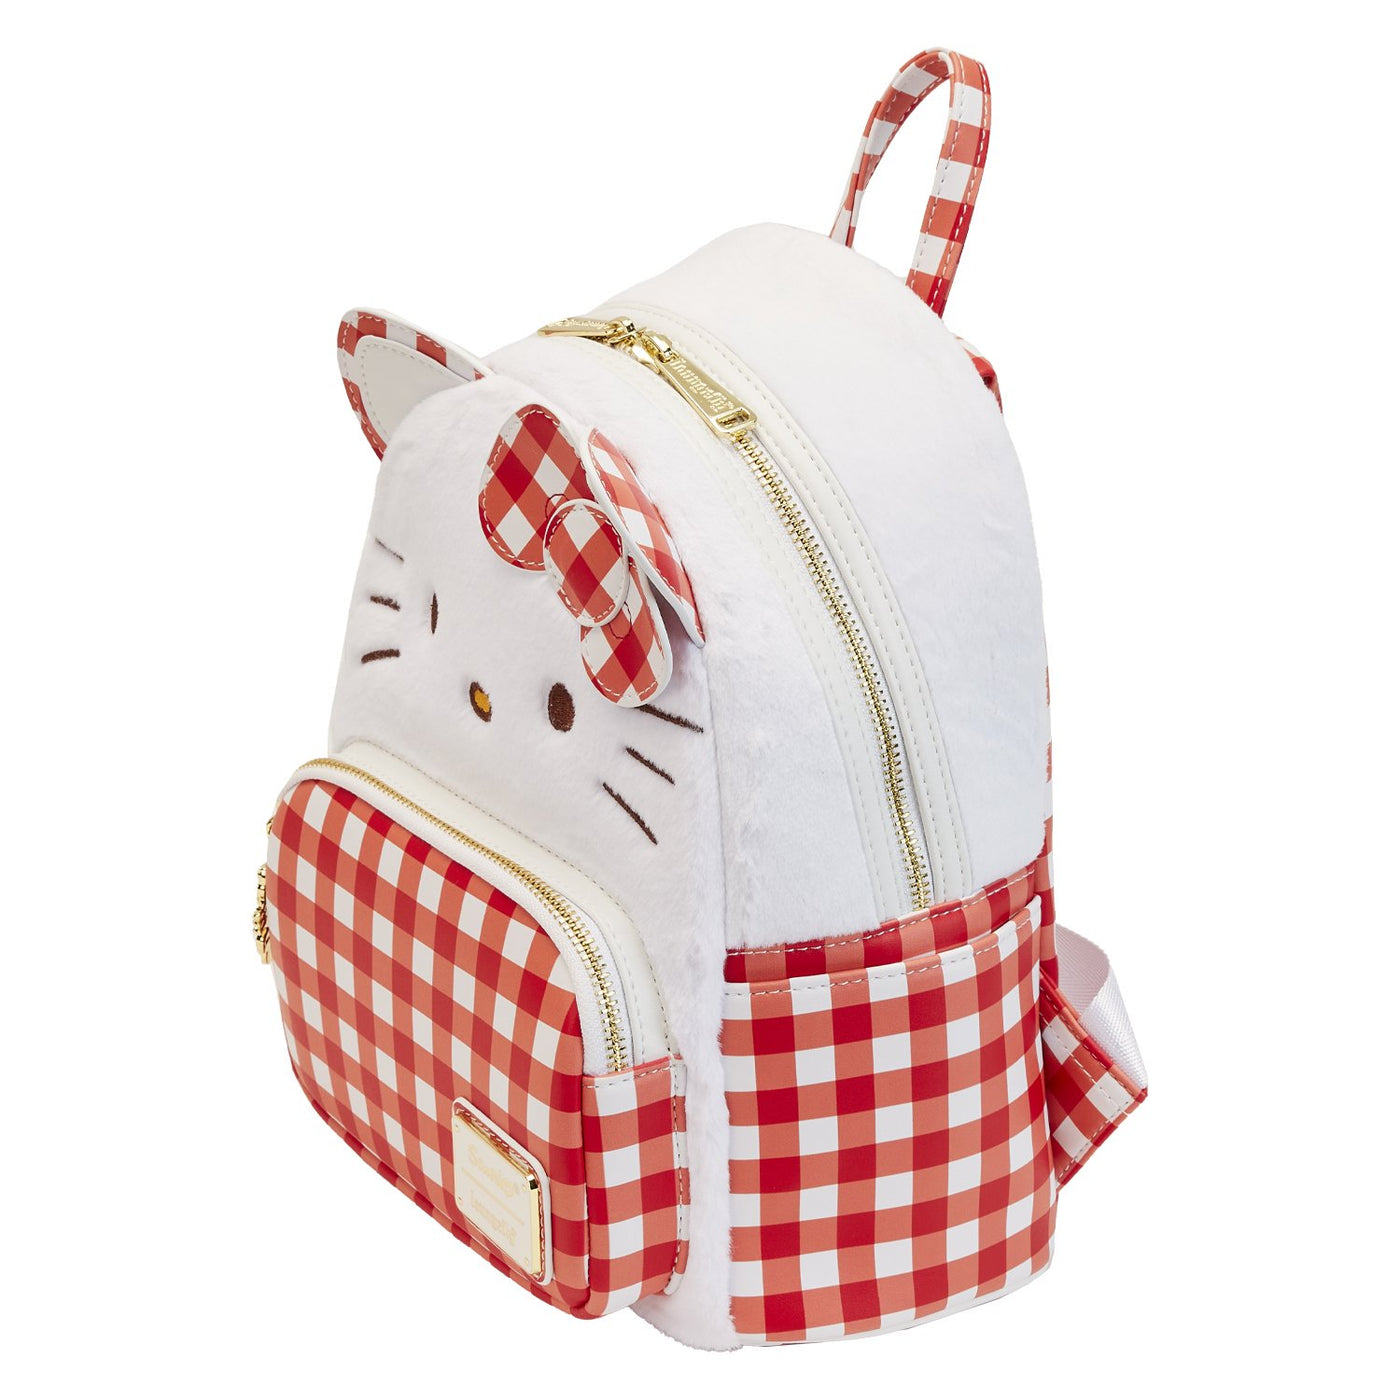 671803447134 - Loungefly Sanrio Hello Kitty Gingham Cosplay Mini Backpack - Top View